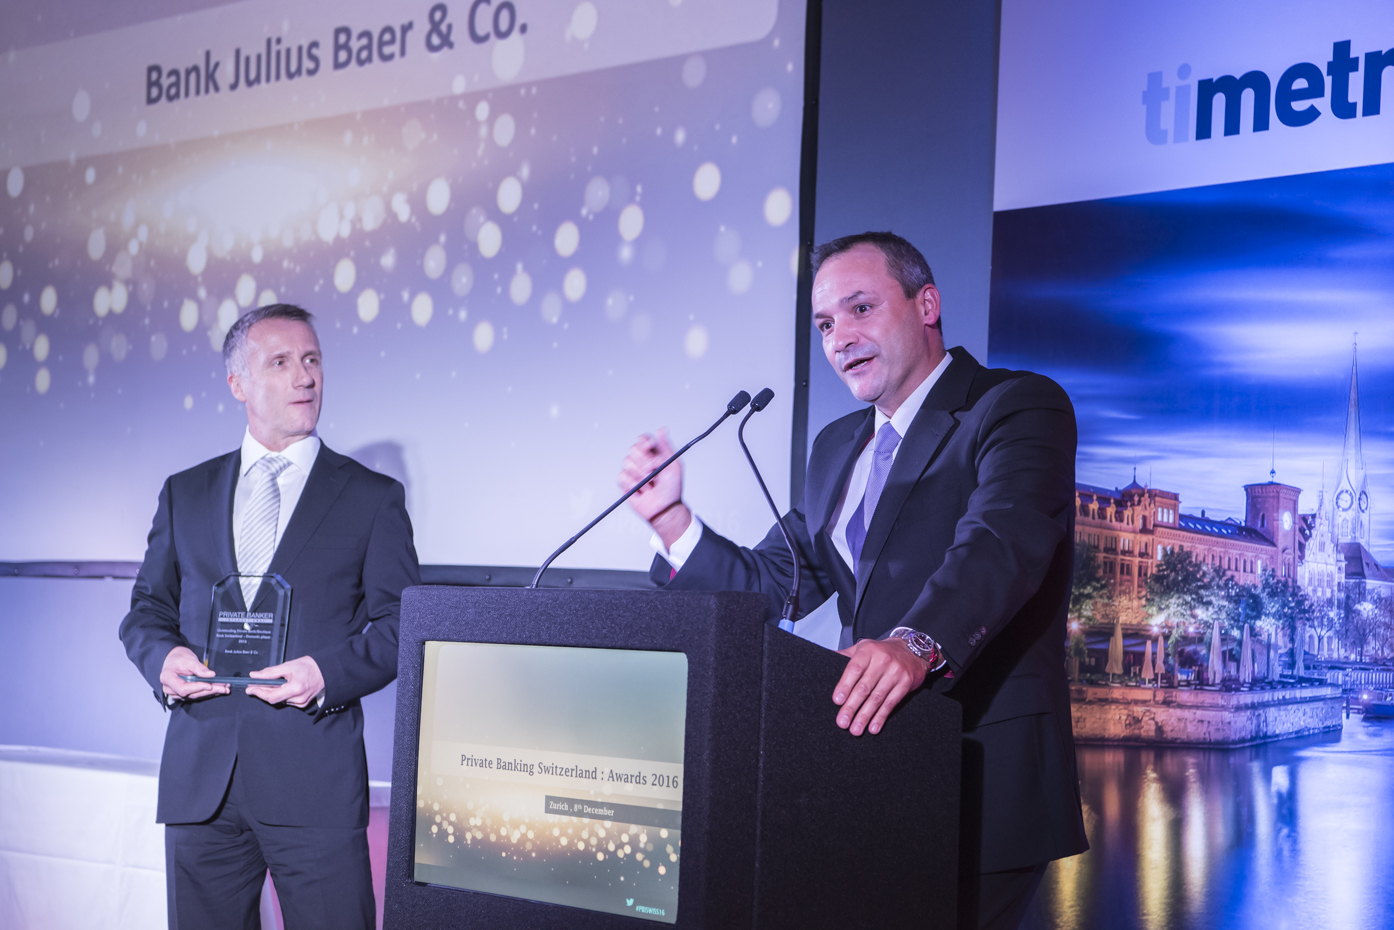 Private Banking Switzerland Conference_Awards 2016_1258.jpg